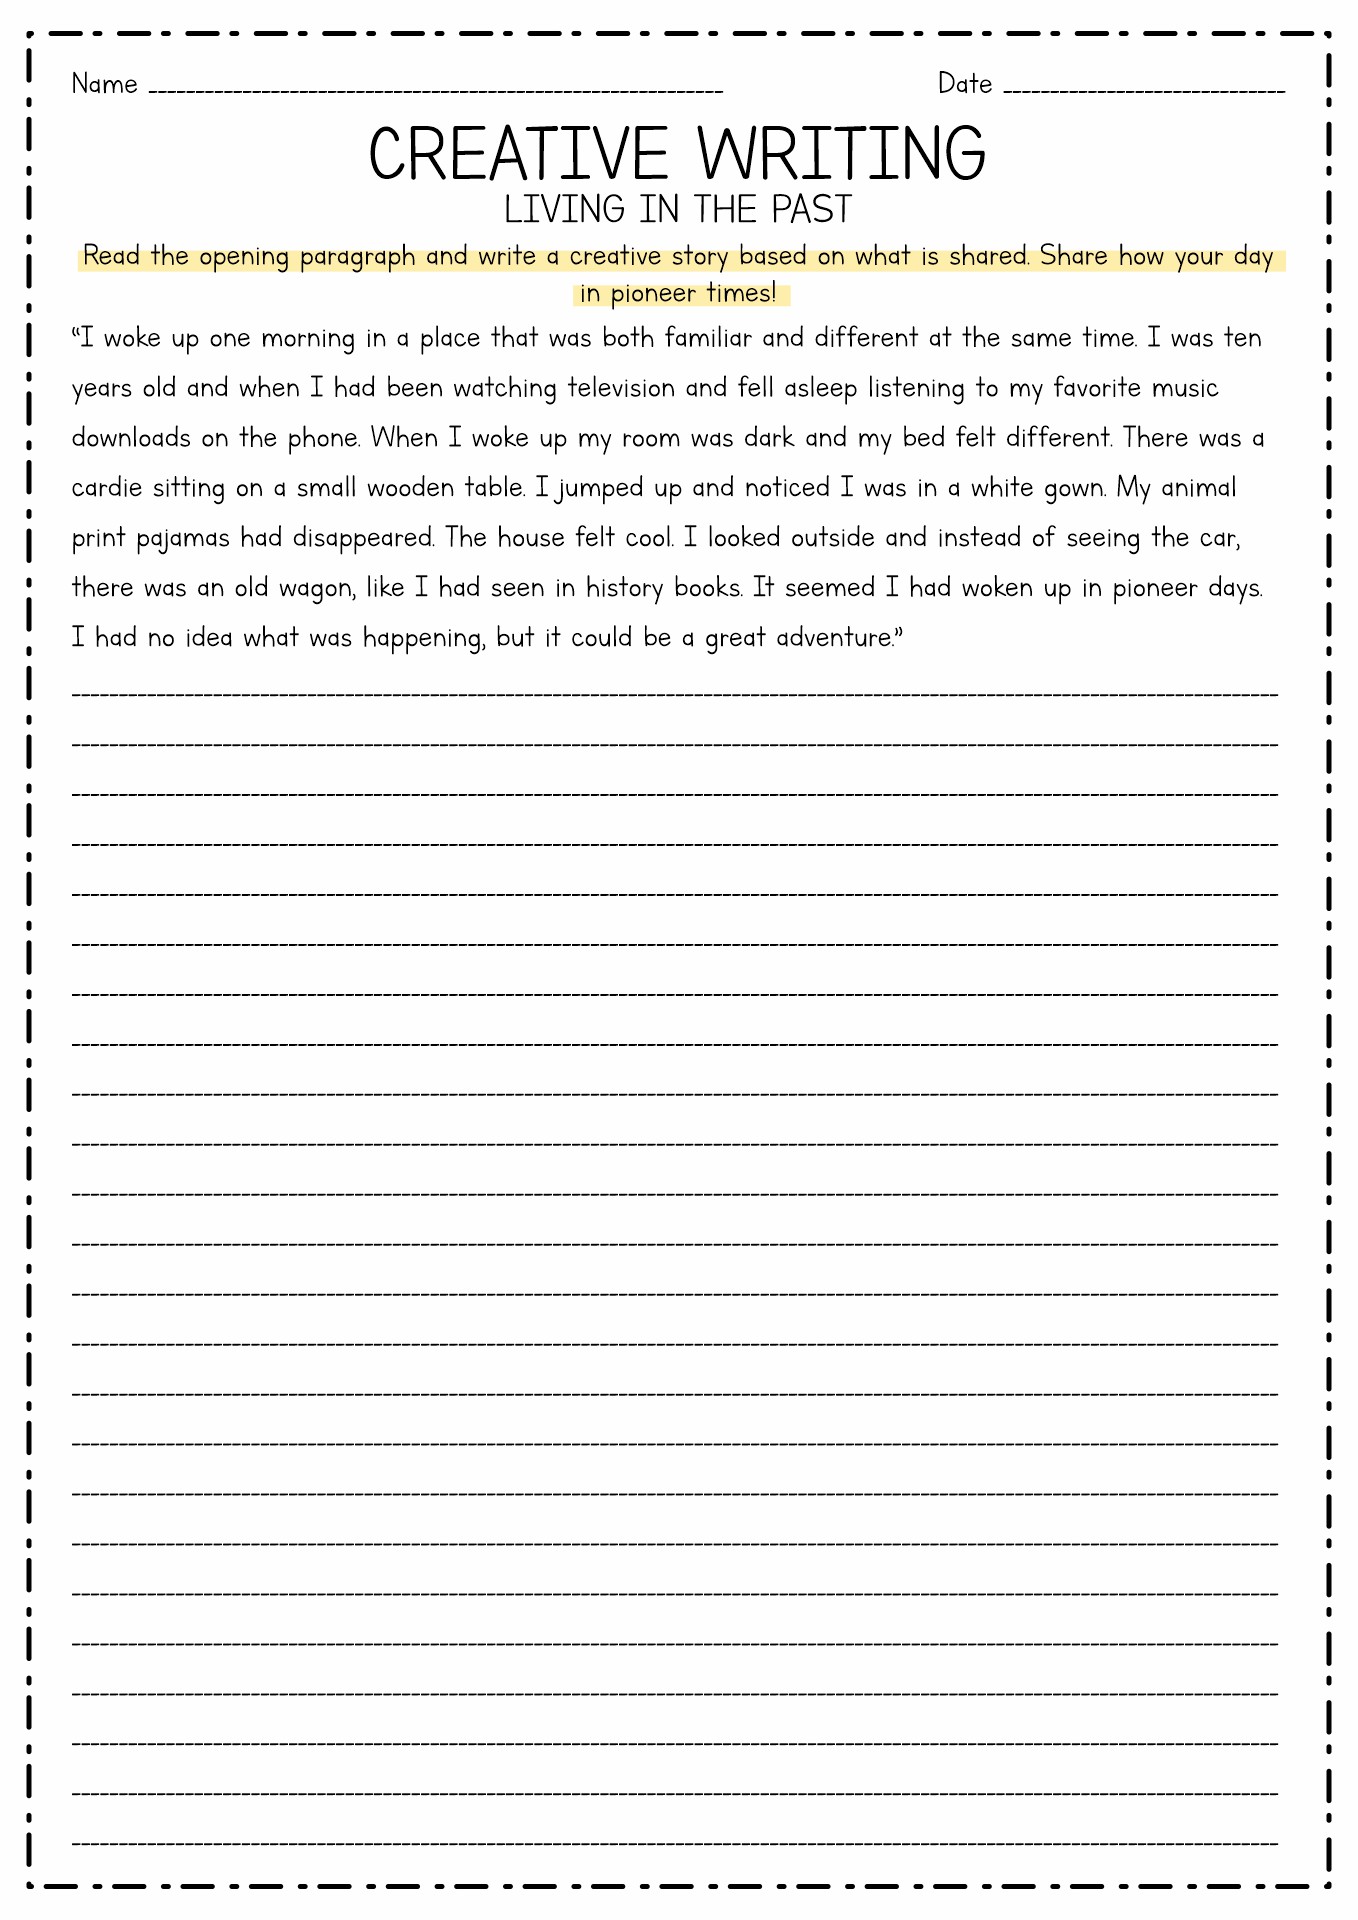 18 Best Images Of 4th Grade Essay Writing Worksheets 4th Grade 